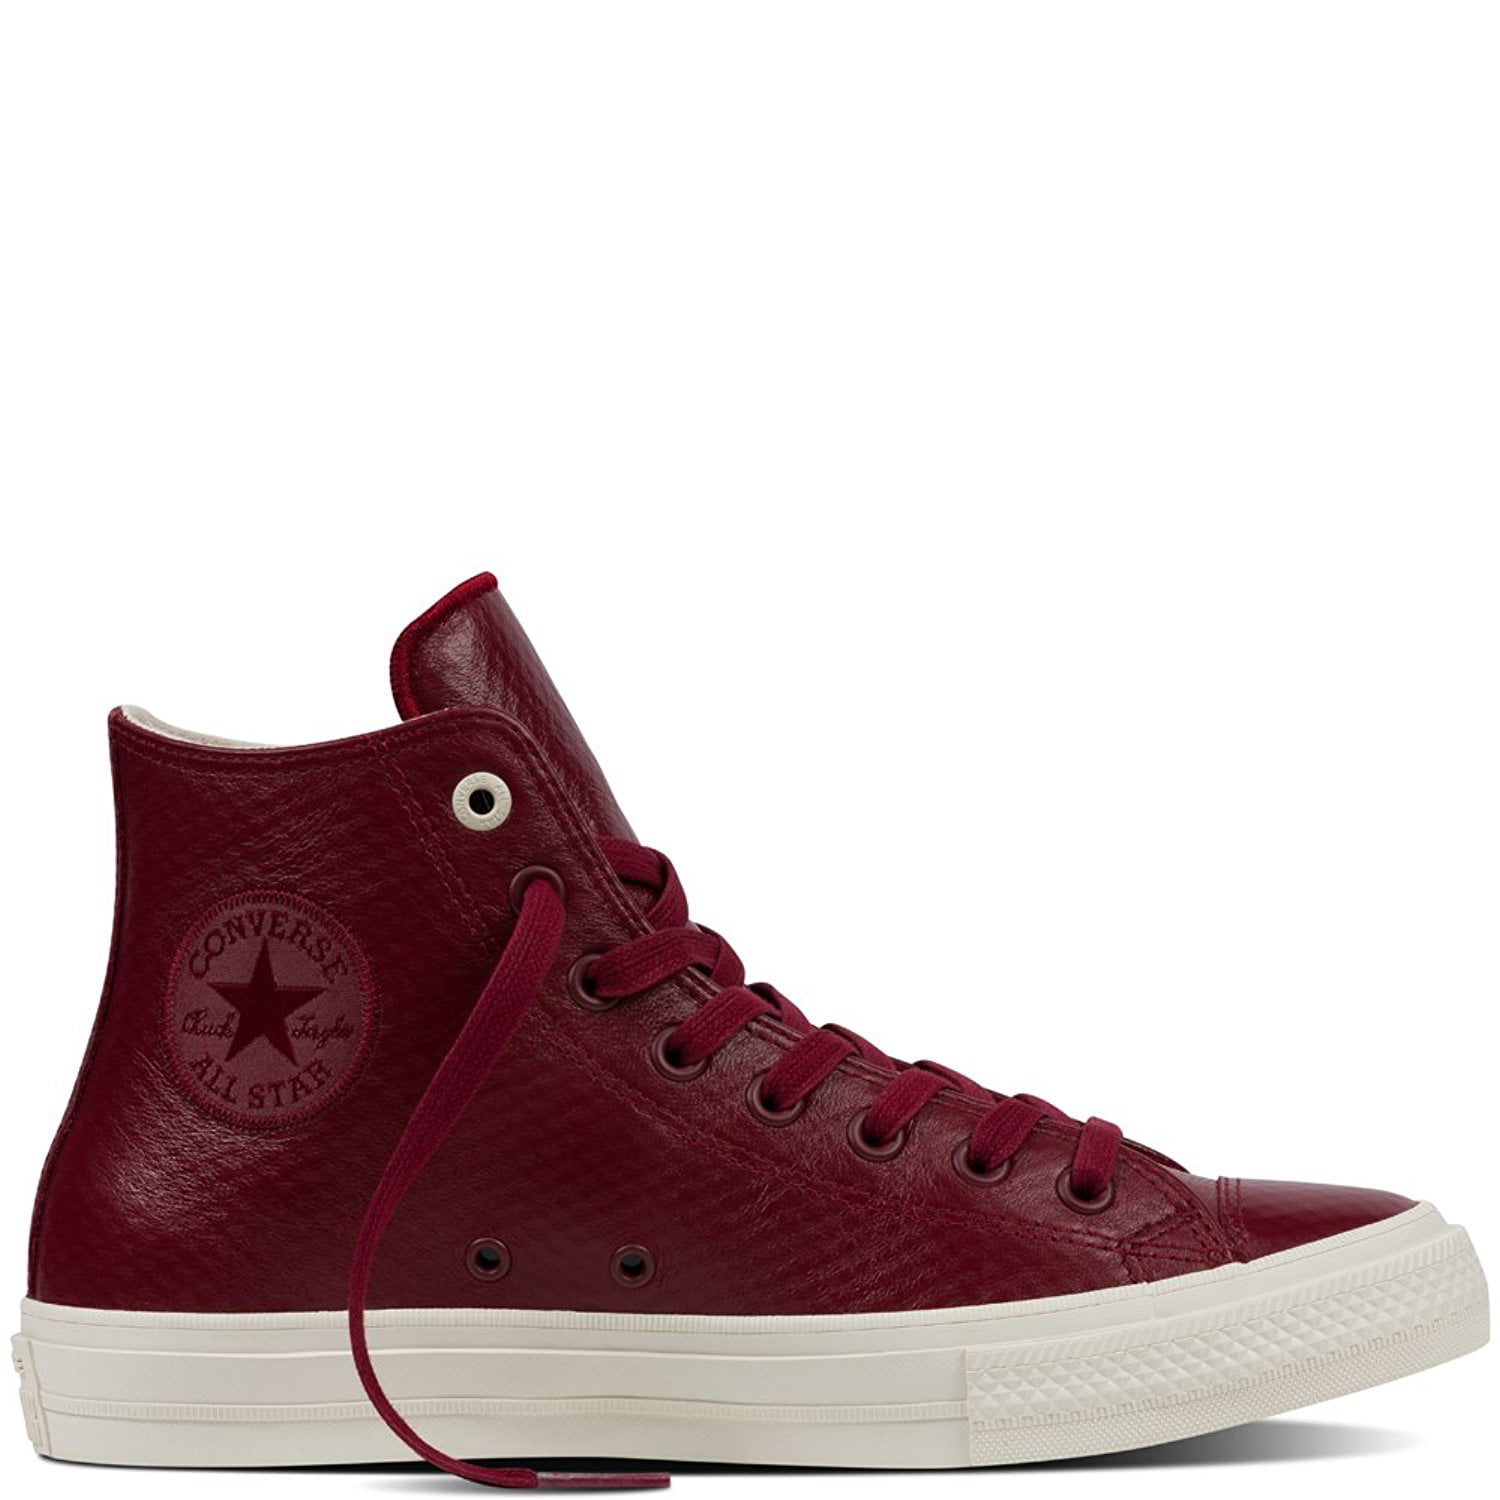 Converse Chuck Taylor All Star II Leather Red Block/Parchment/Gum. 9.5